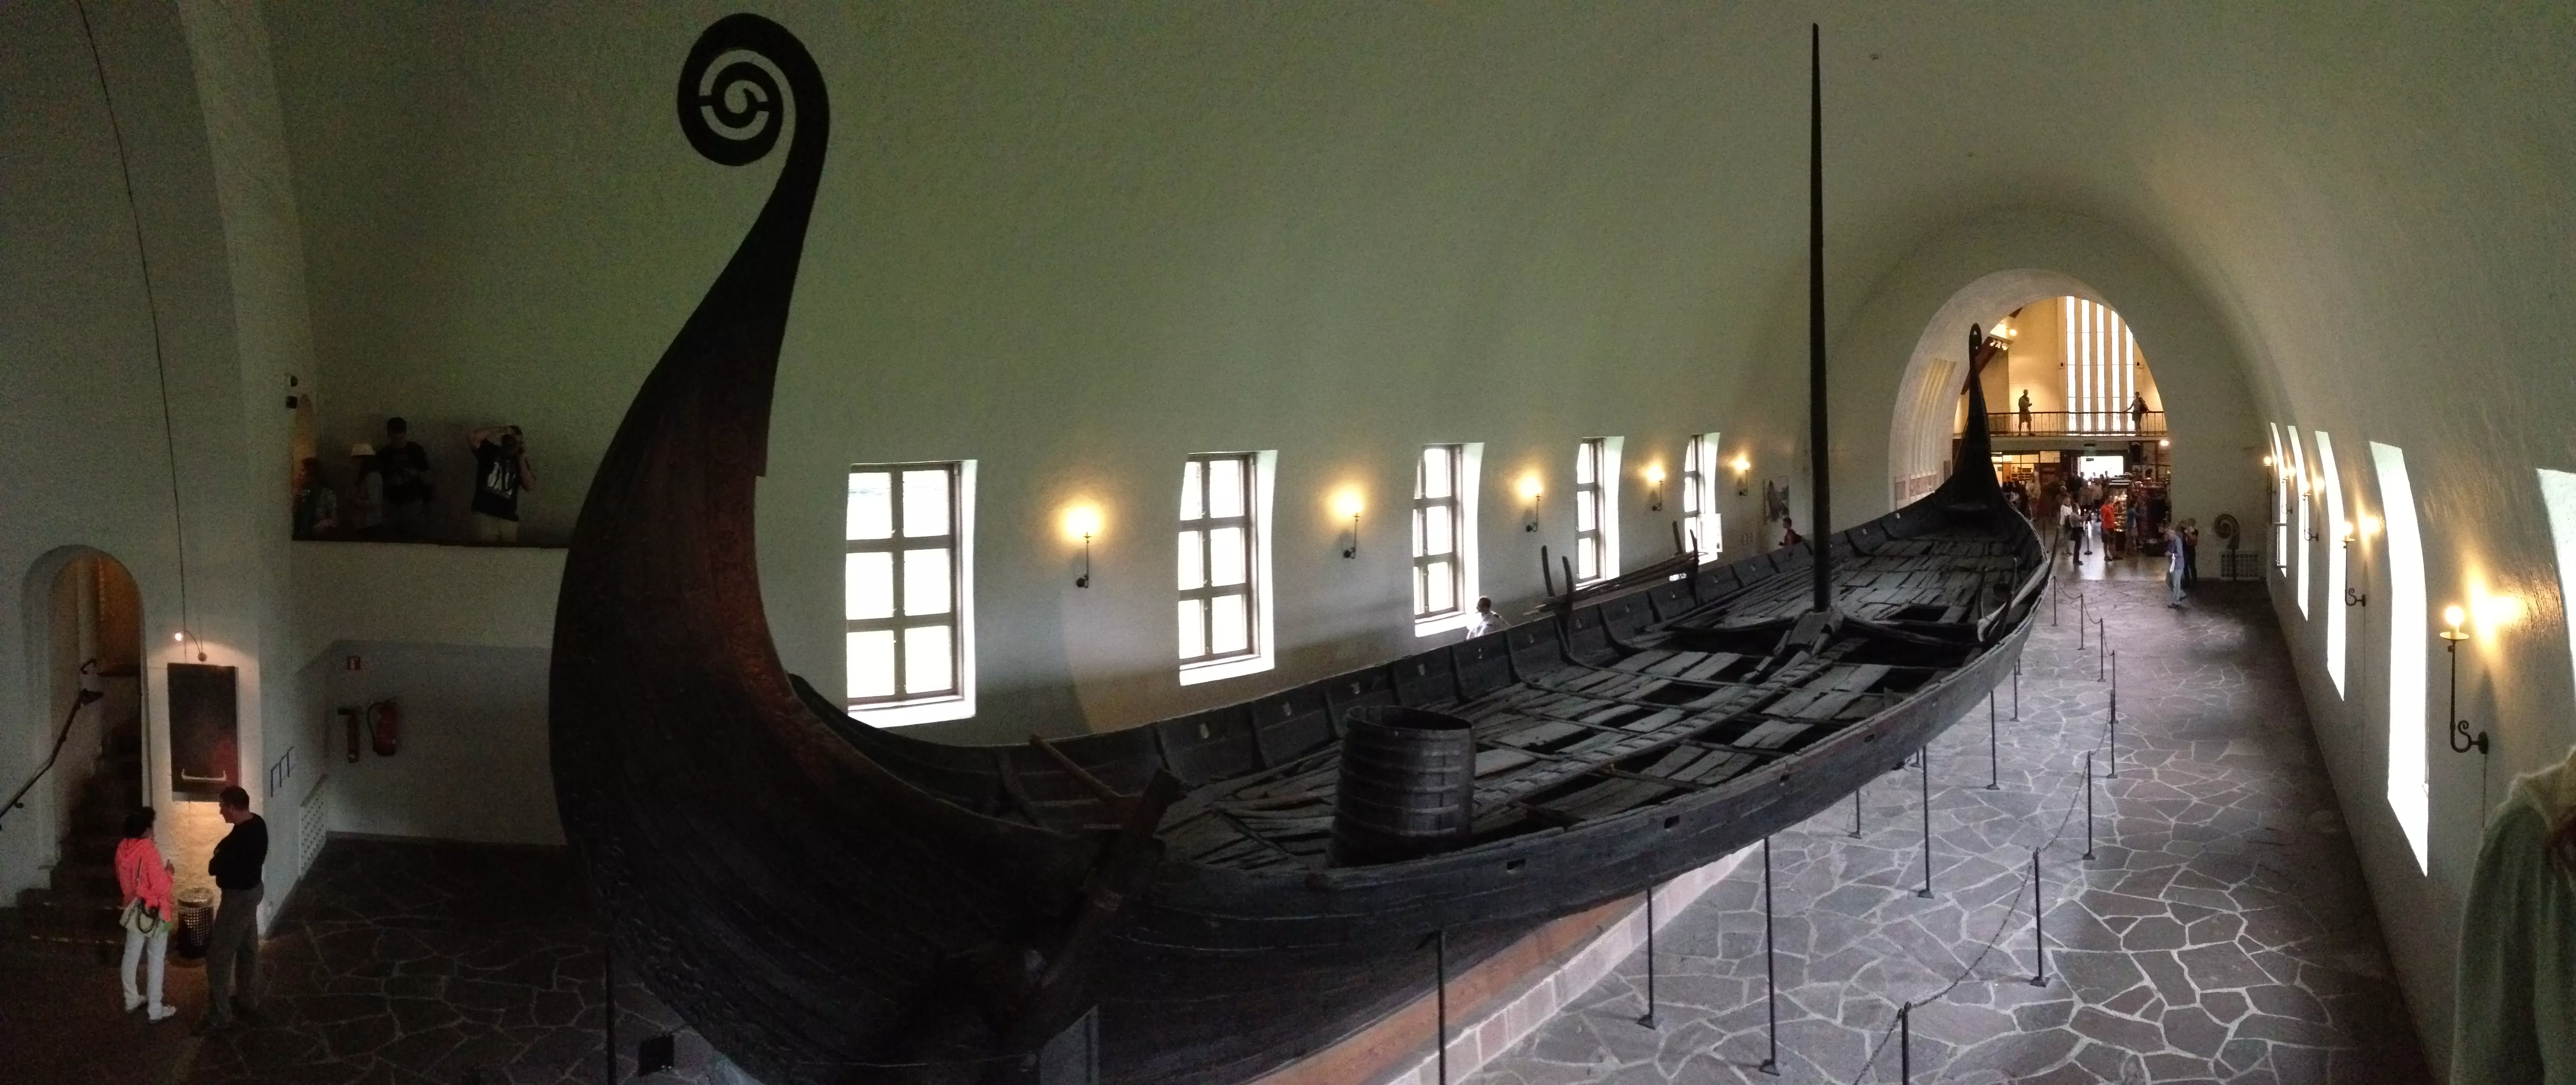 The Viking Museum in Sweden, Europe | Museums - Rated 3.3